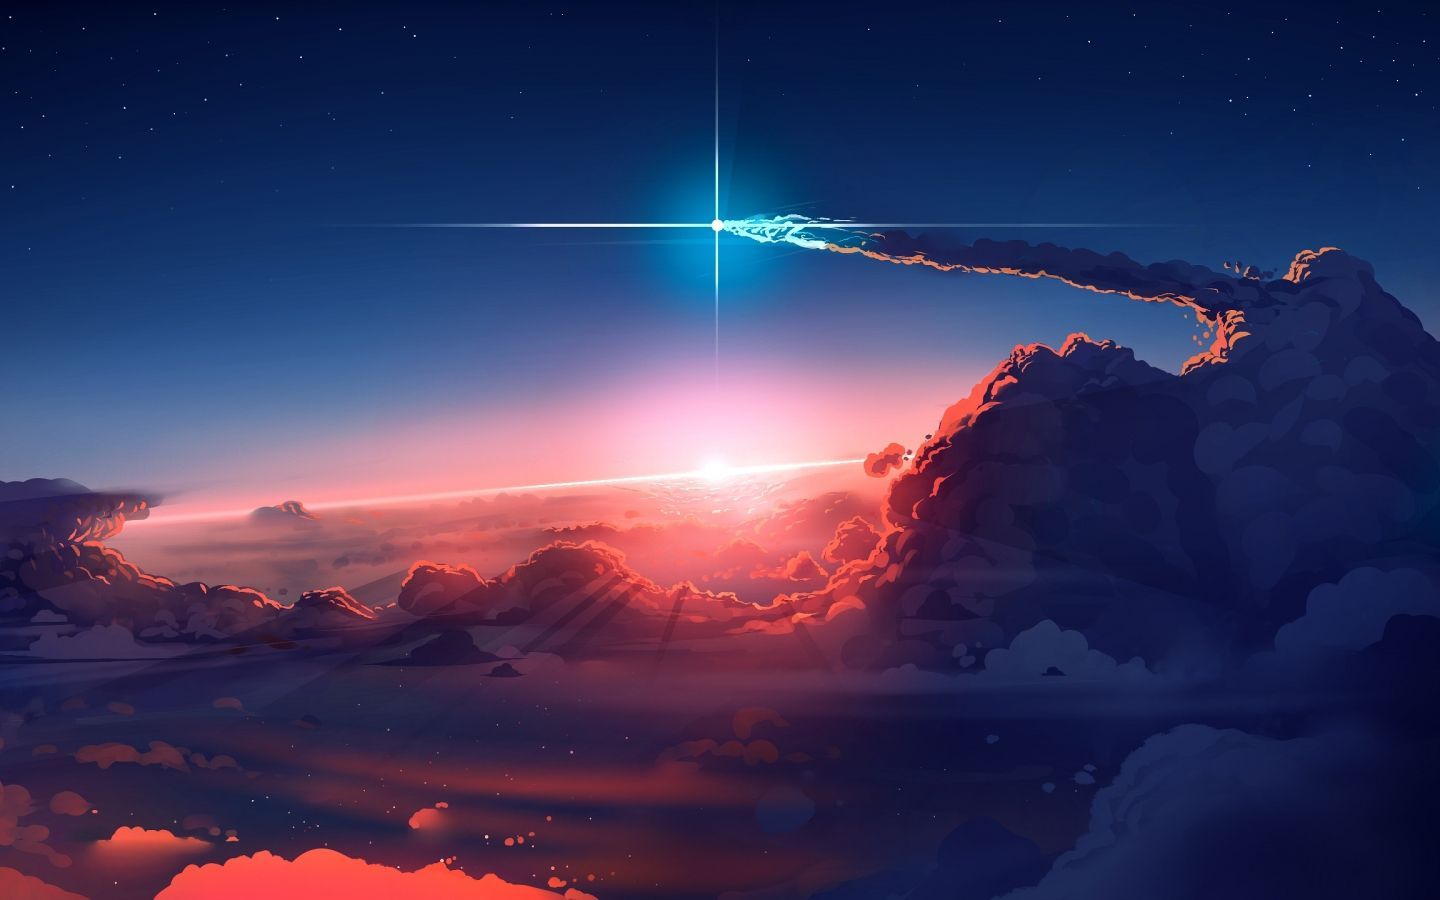 A painting of the sun setting over some mountains - 1440x900, landscape